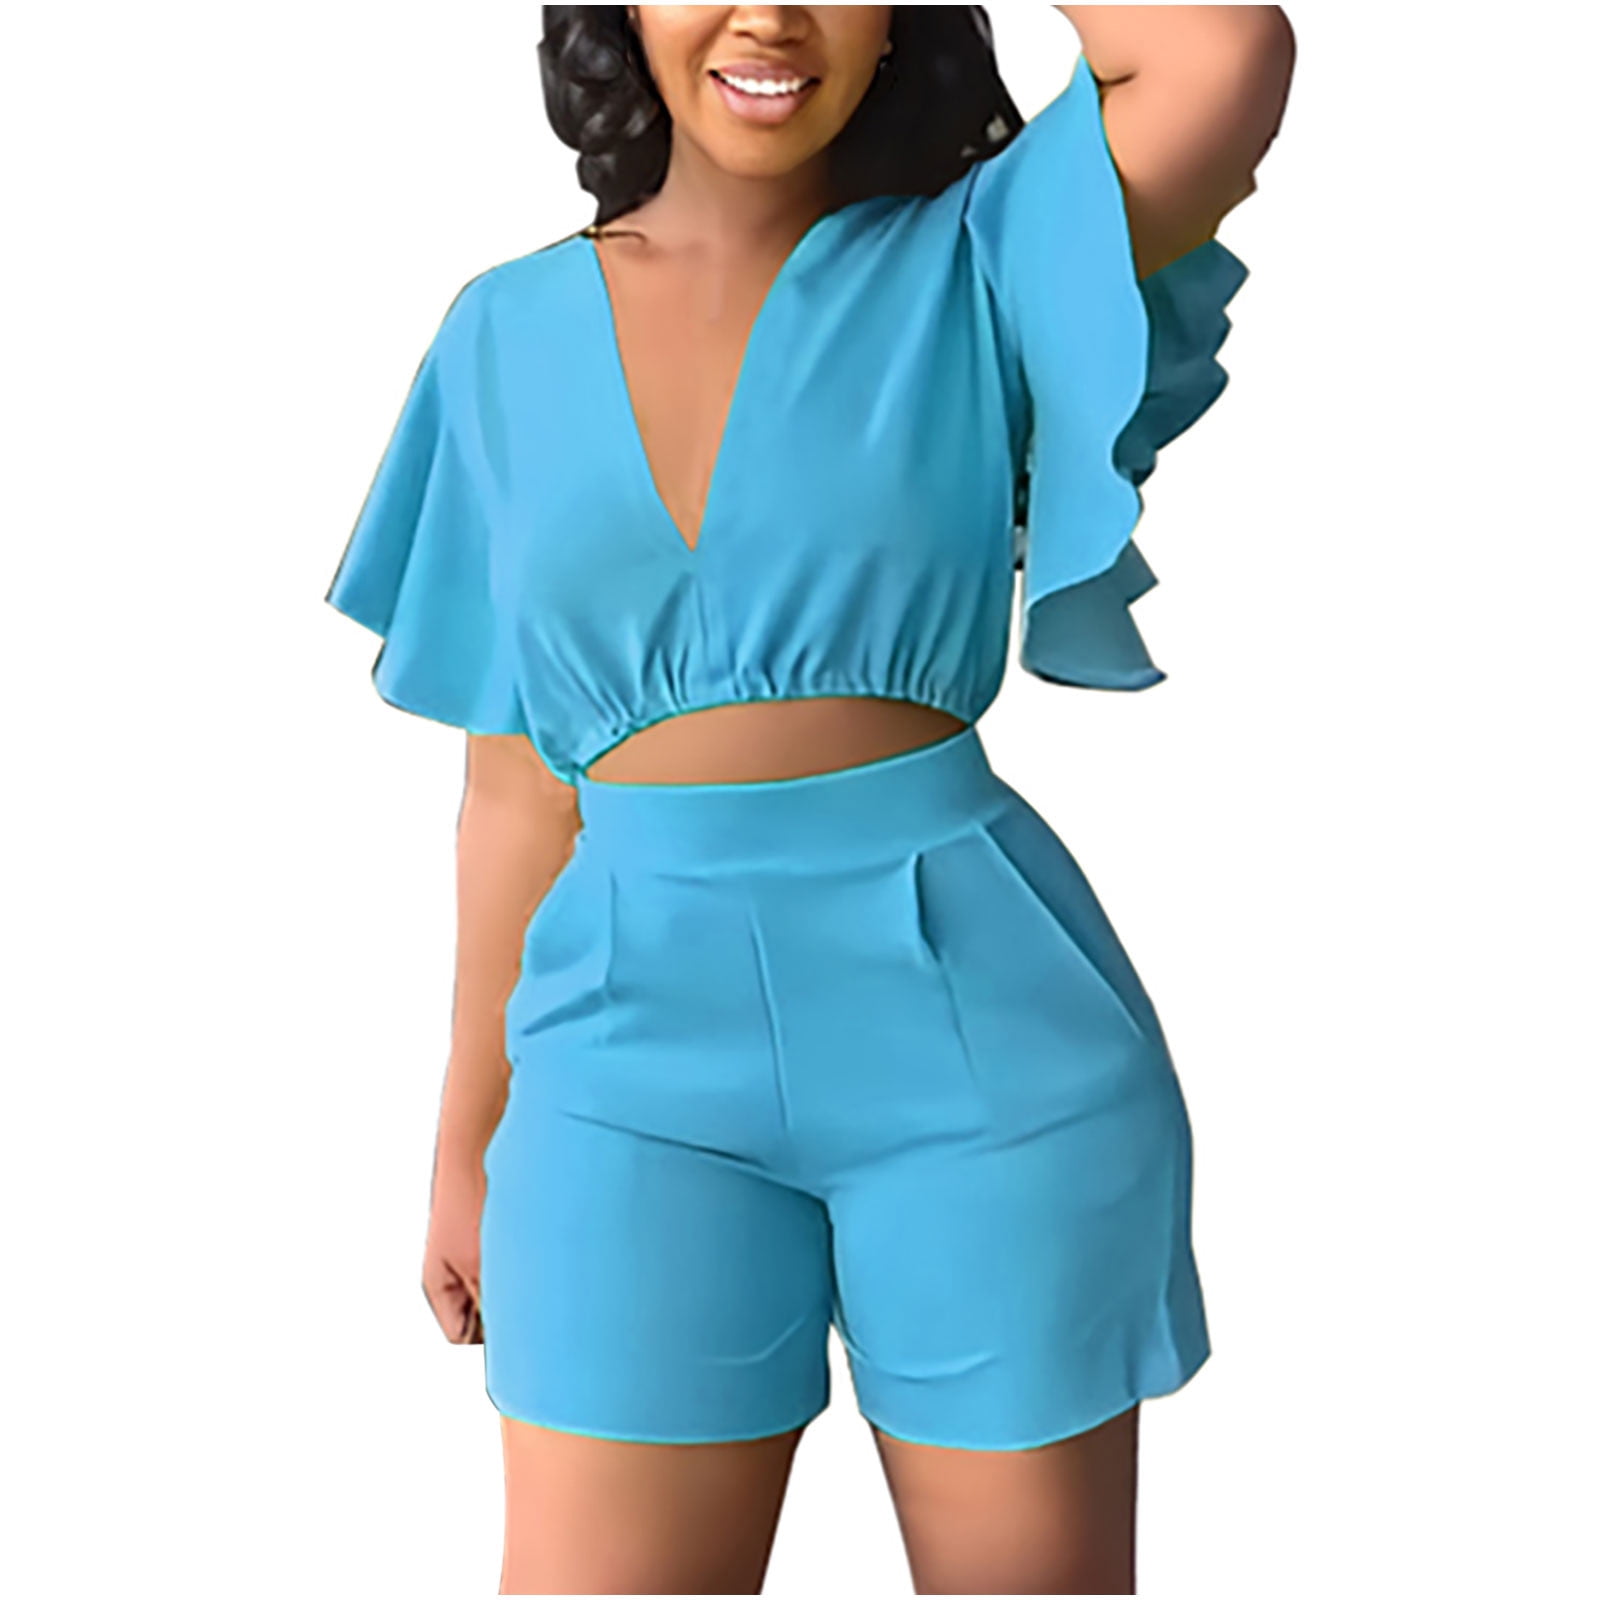 Ecqkame Two Piece Sets Womens Outfits Clearance Women's Ruffle Short Sleeve  V-Neck Top Casual Shorts Summer Plus Size Women Suits Orange L 